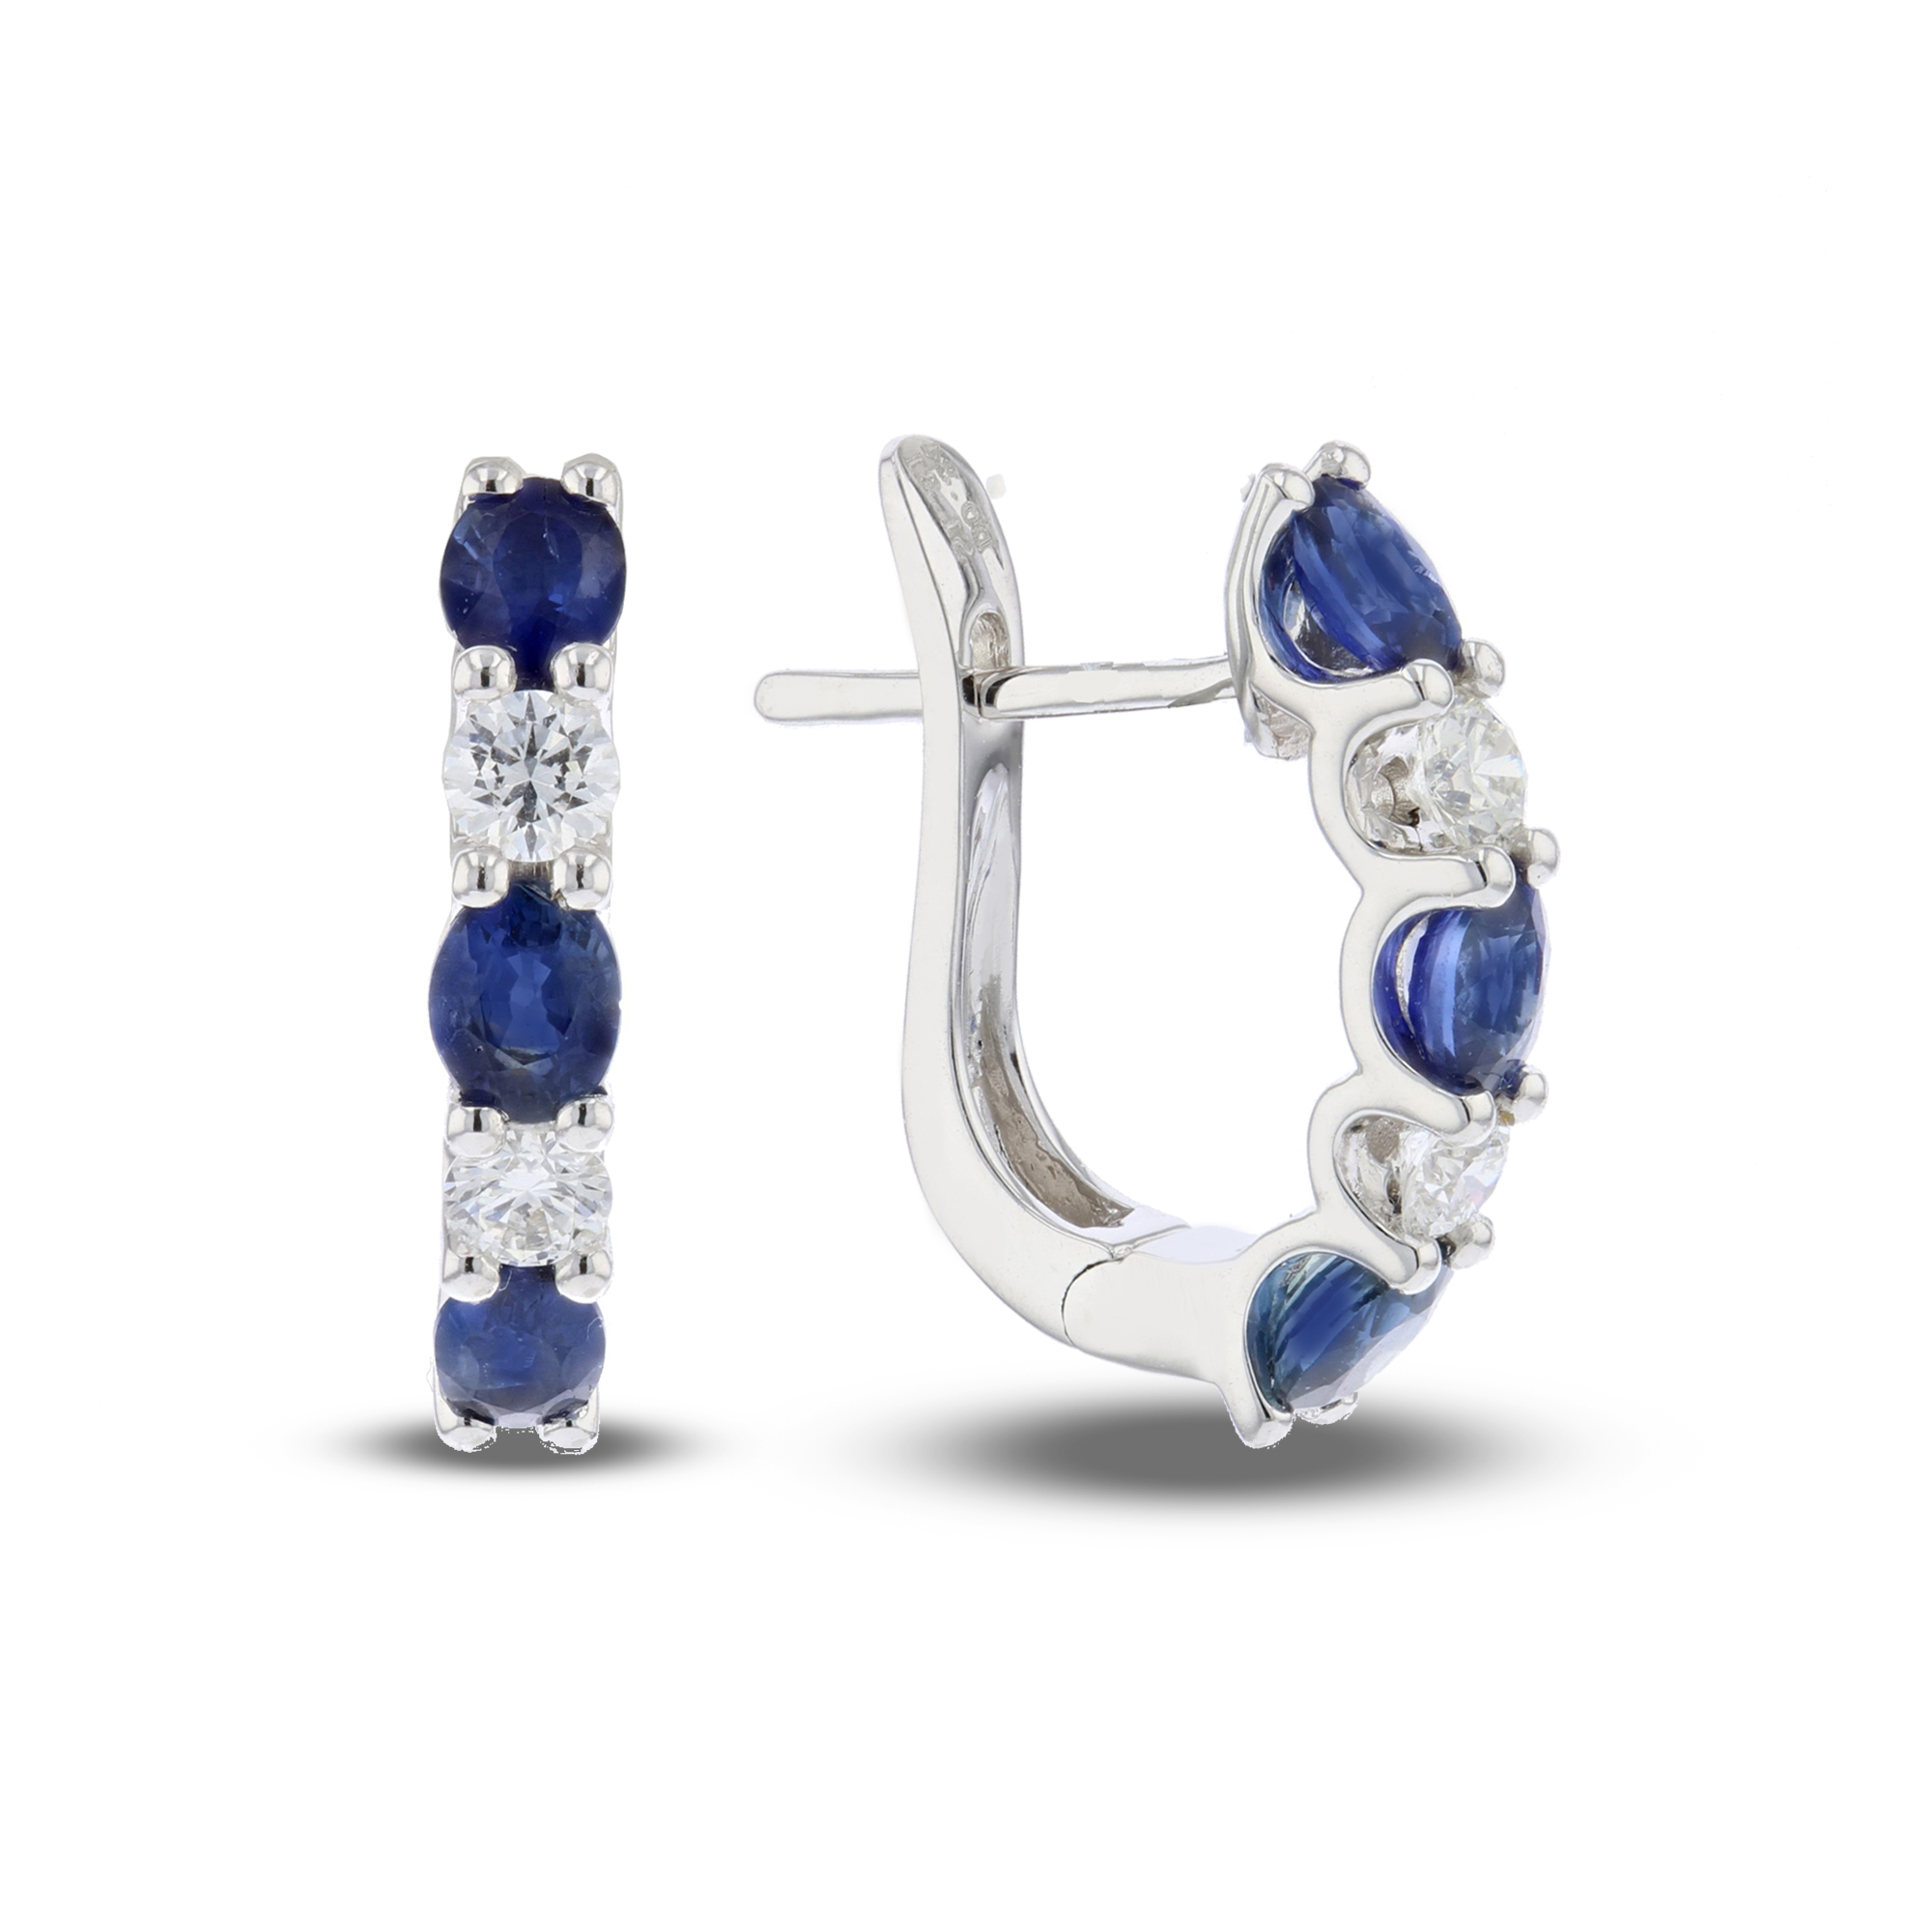 View 1.65ctw DIamond and Sapphire Hoop Earrings in 18k White Gold